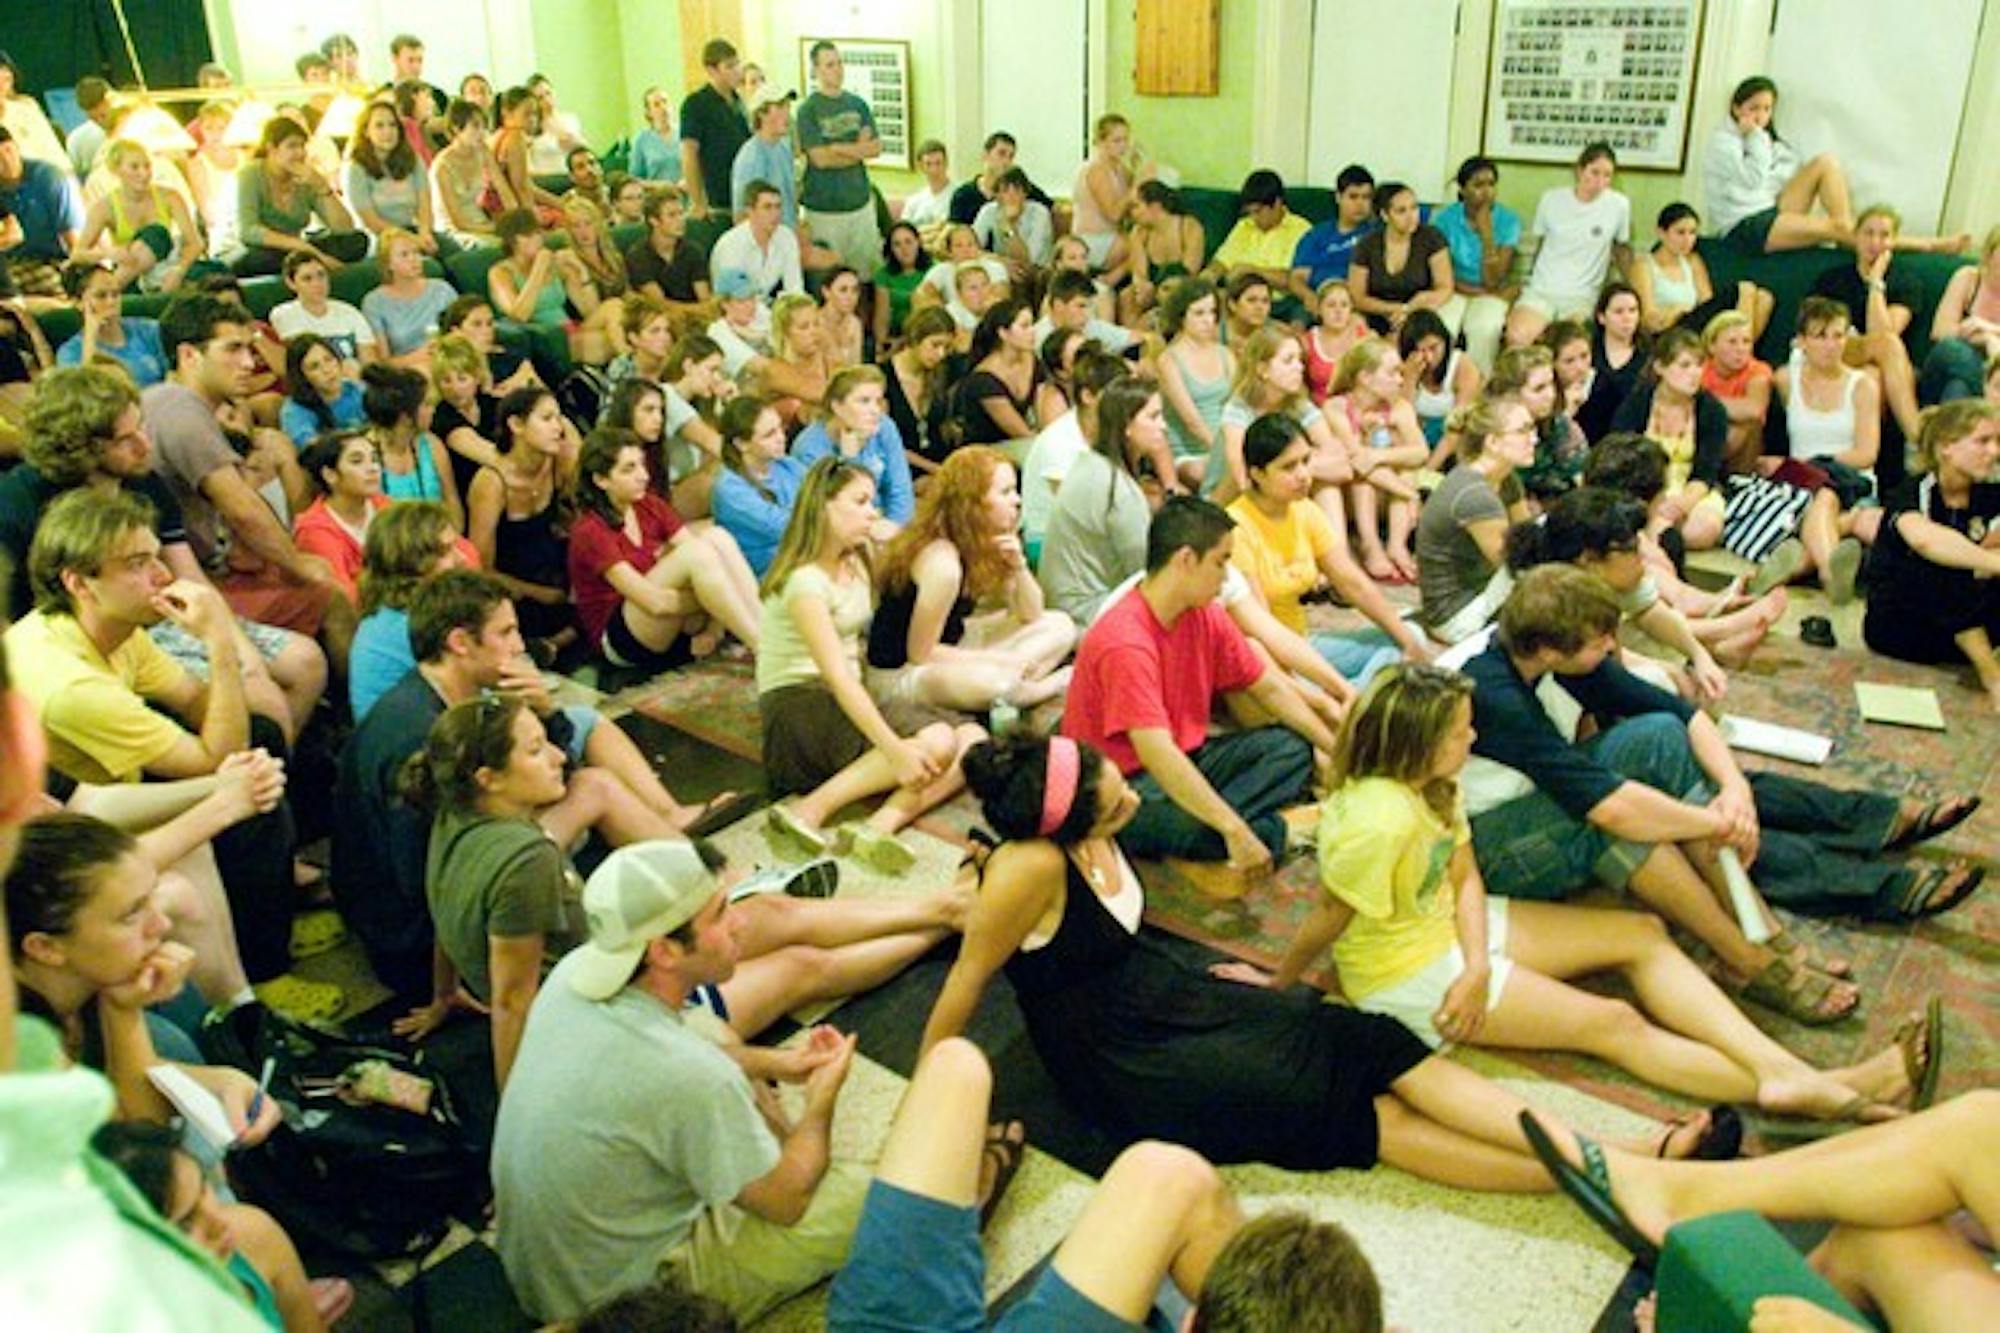 Students crowd Gamma Delta Chi fraternity's chapter room Tuesday to discuss gender issues on campus.